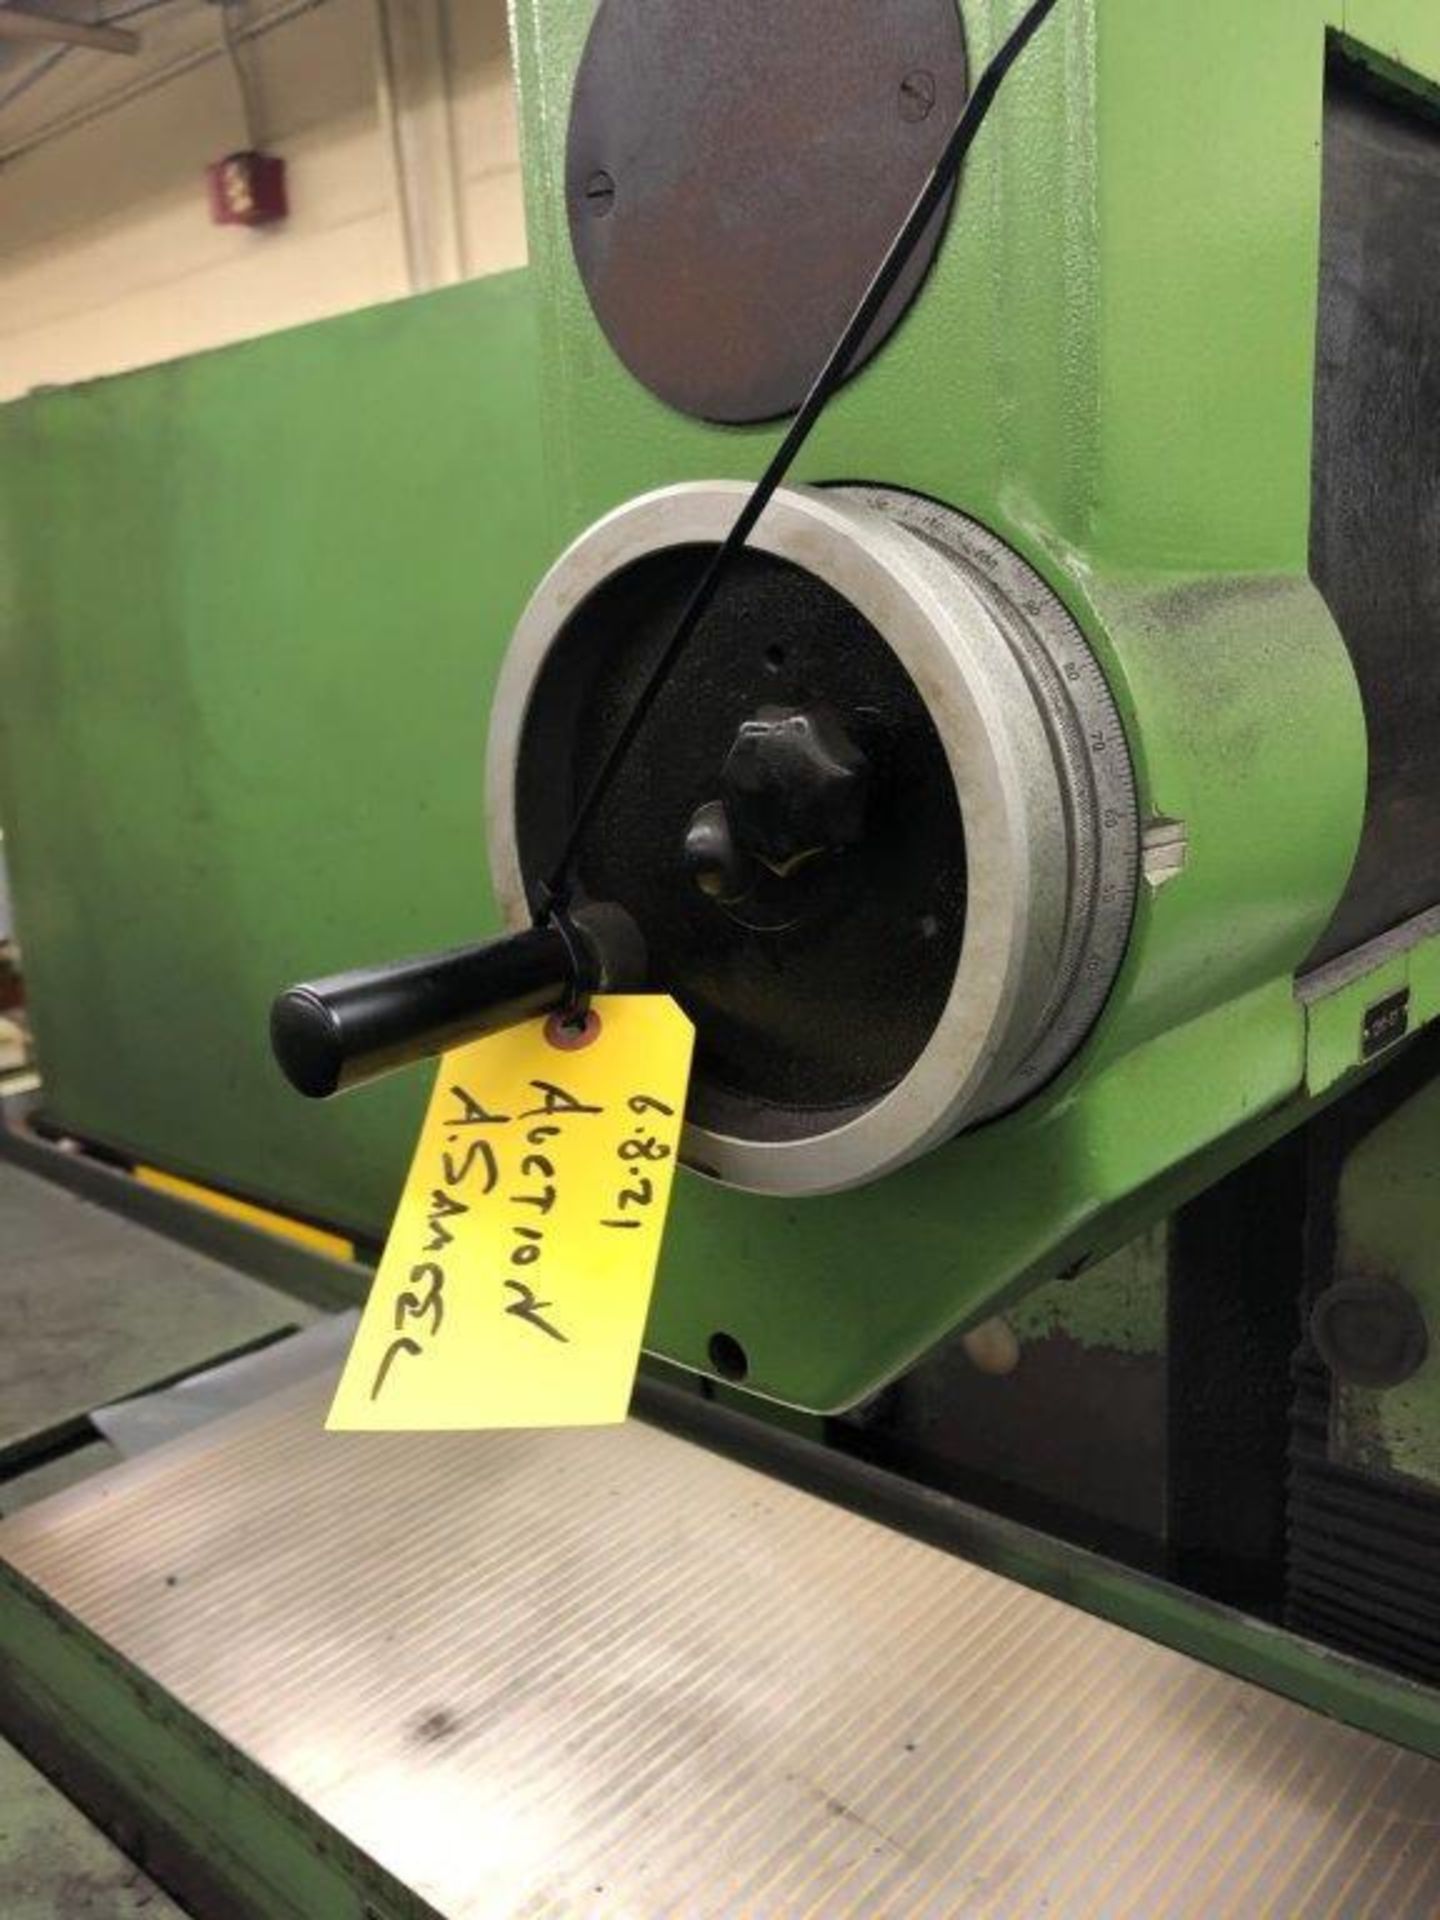 Aba FFU 1000/50 Surface Grinder, S/N 207990 (New 1986), 15.75" x 39" Electro-Magnetic Chuck - Image 8 of 10